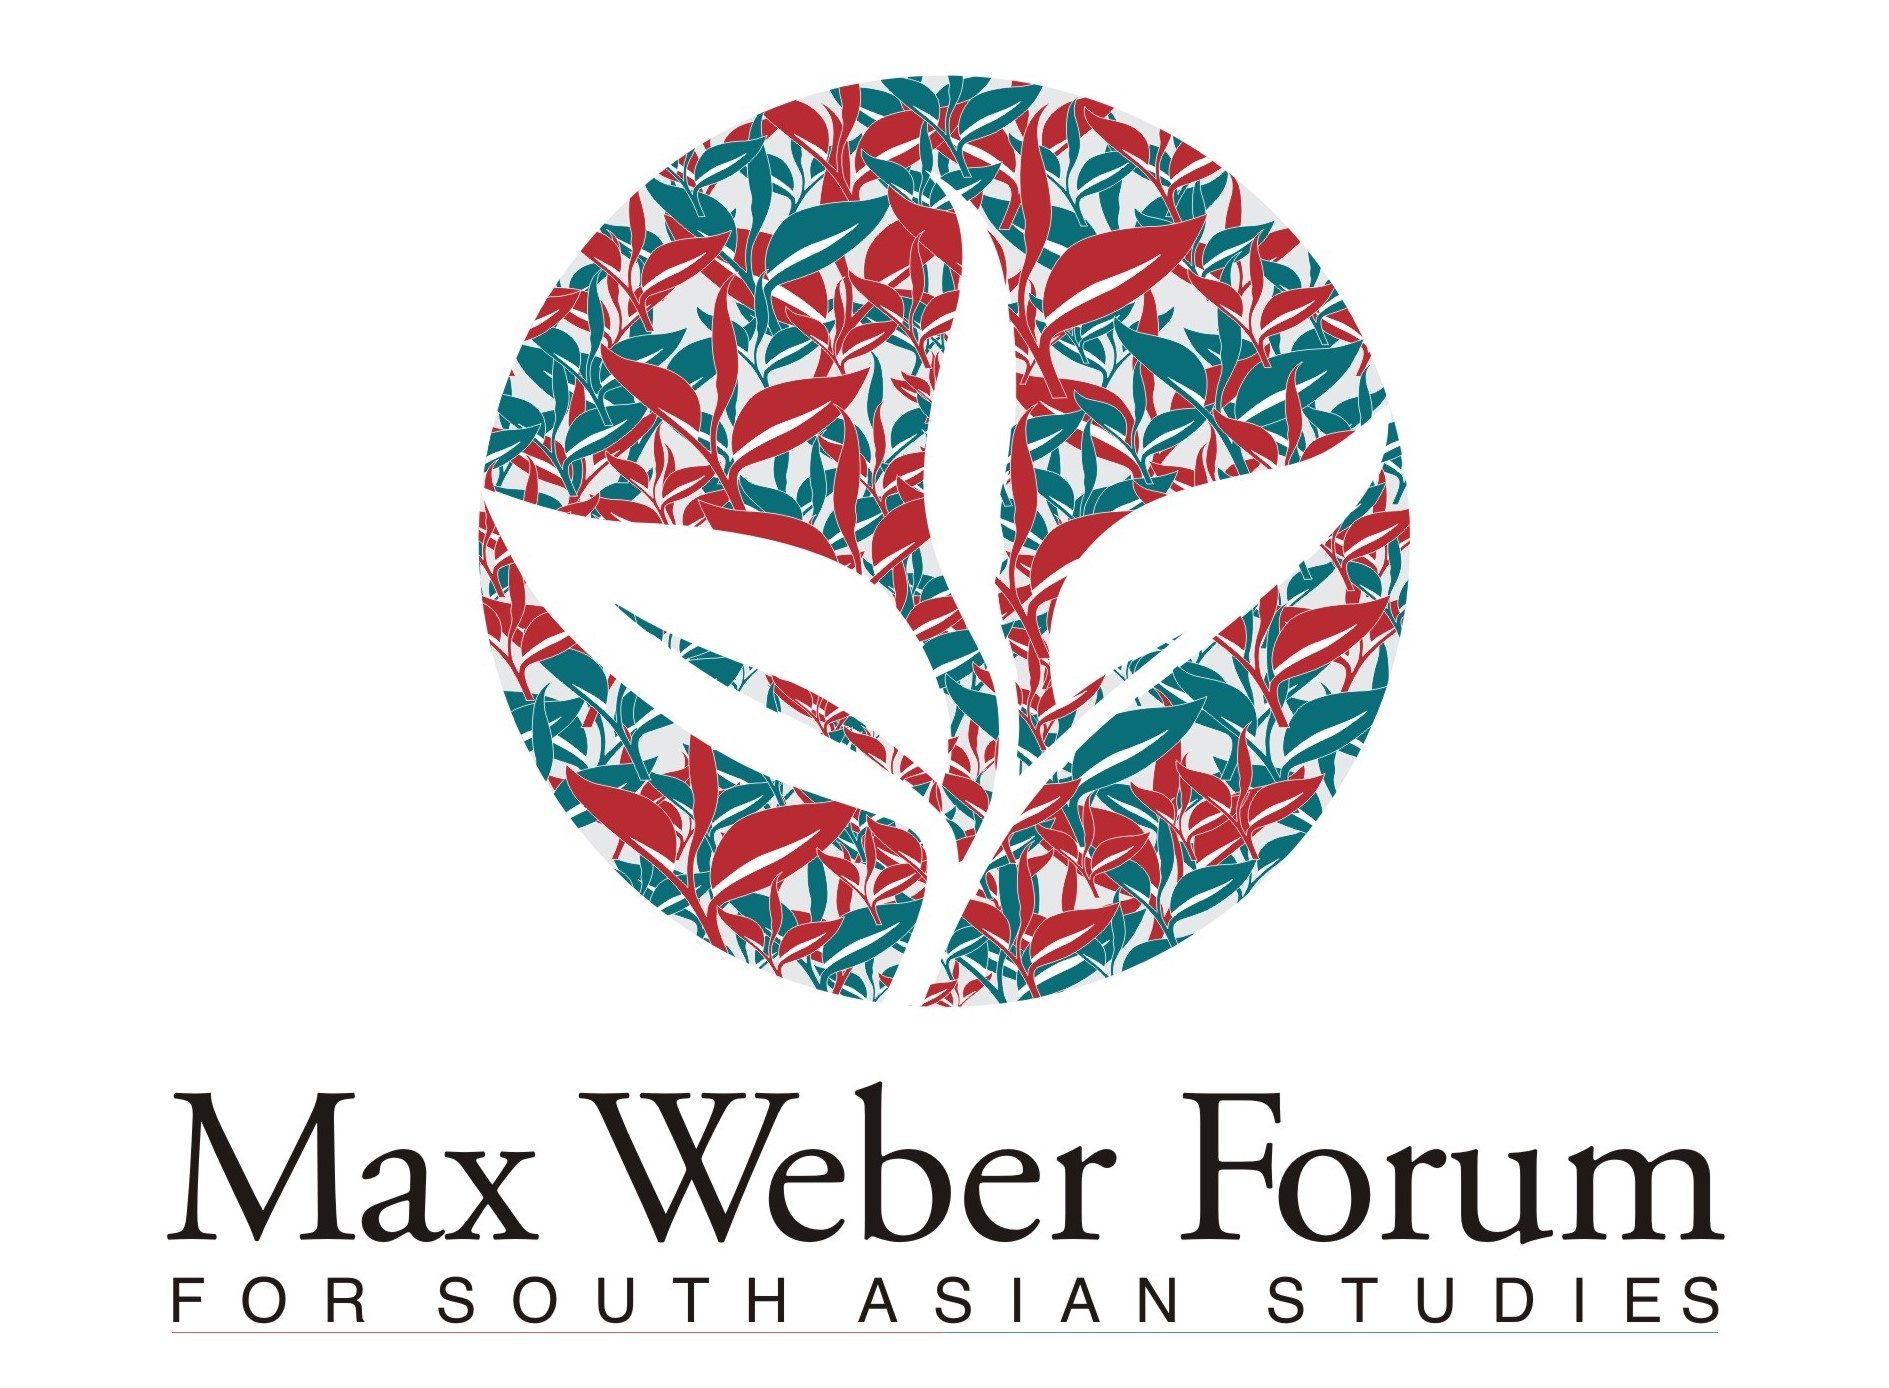 Max Weber Forum for South Asian Studies